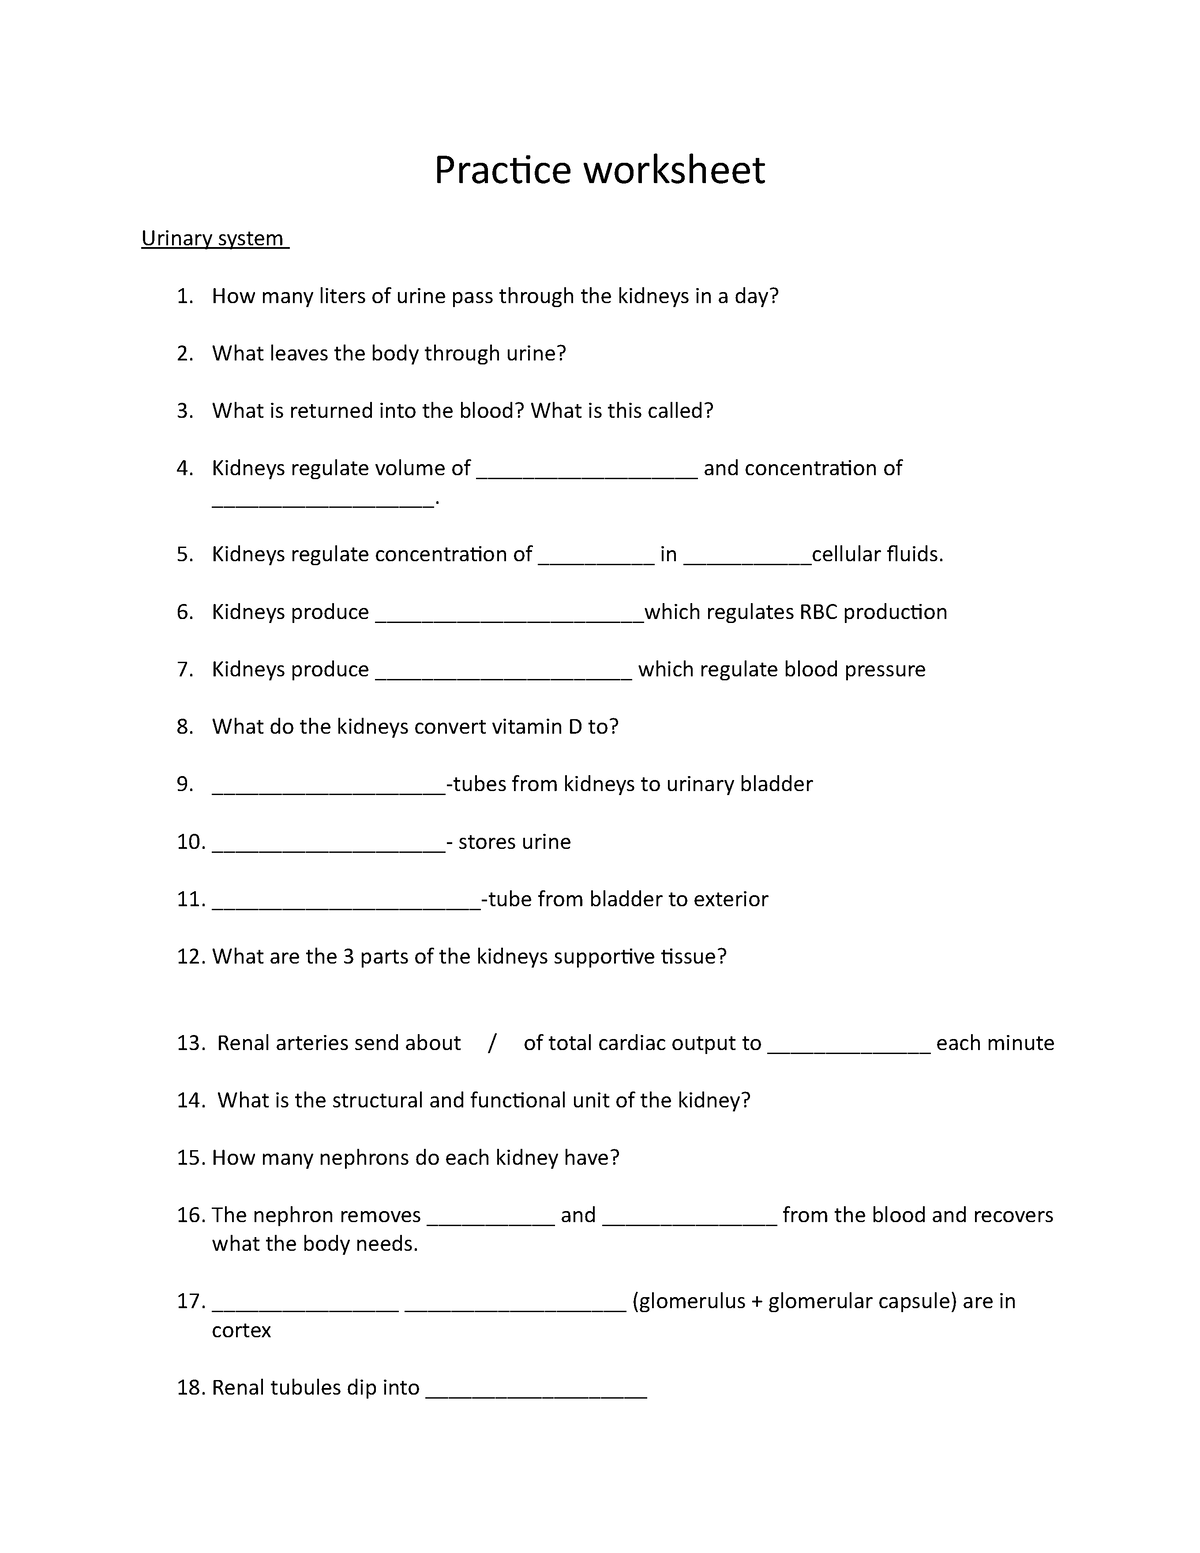 Practice worksheet from ppt urinary - Practice worksheet Urinary system ...